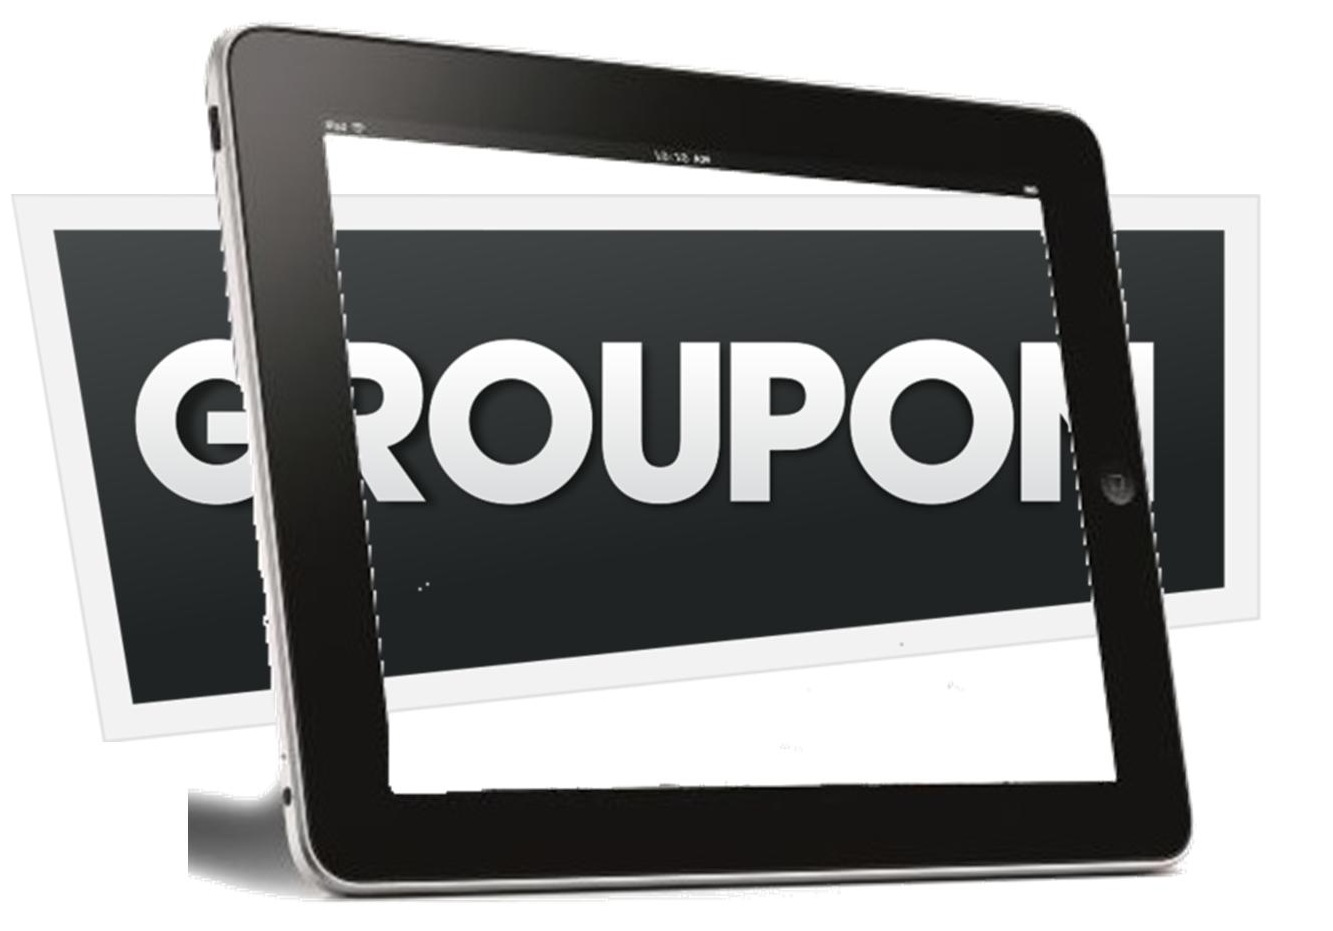 Groupon - Mobile Payments App Accident